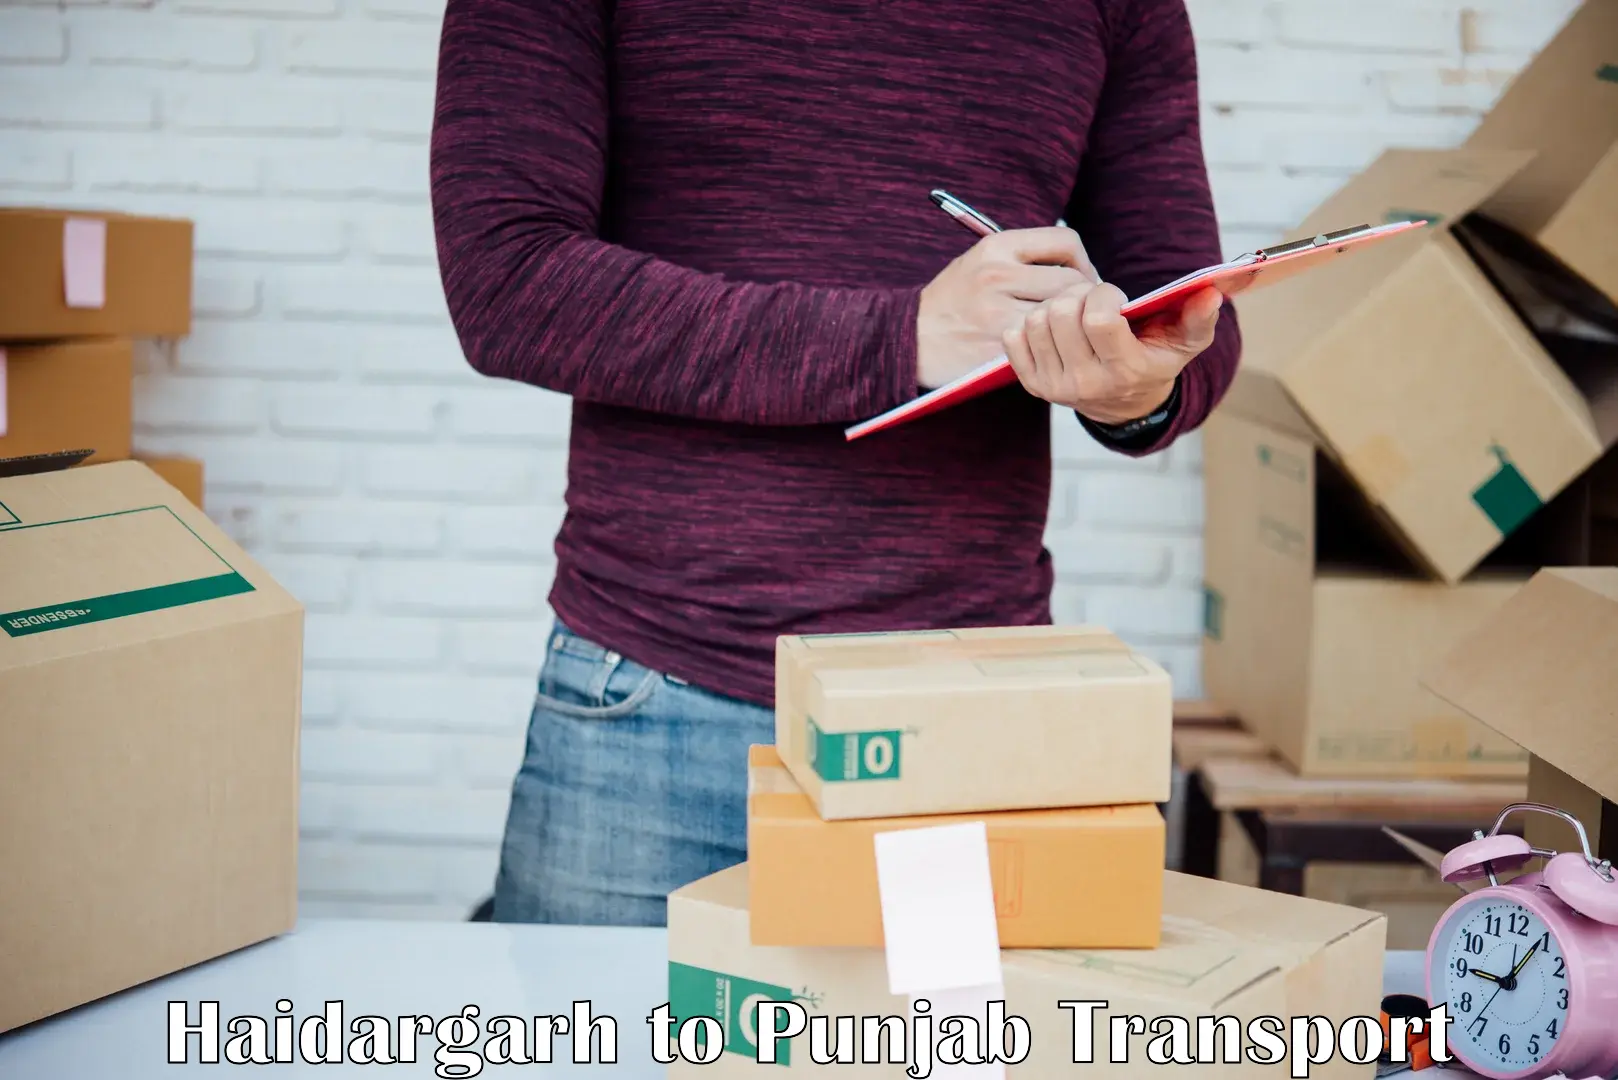 Vehicle transport services in Haidargarh to Mohali